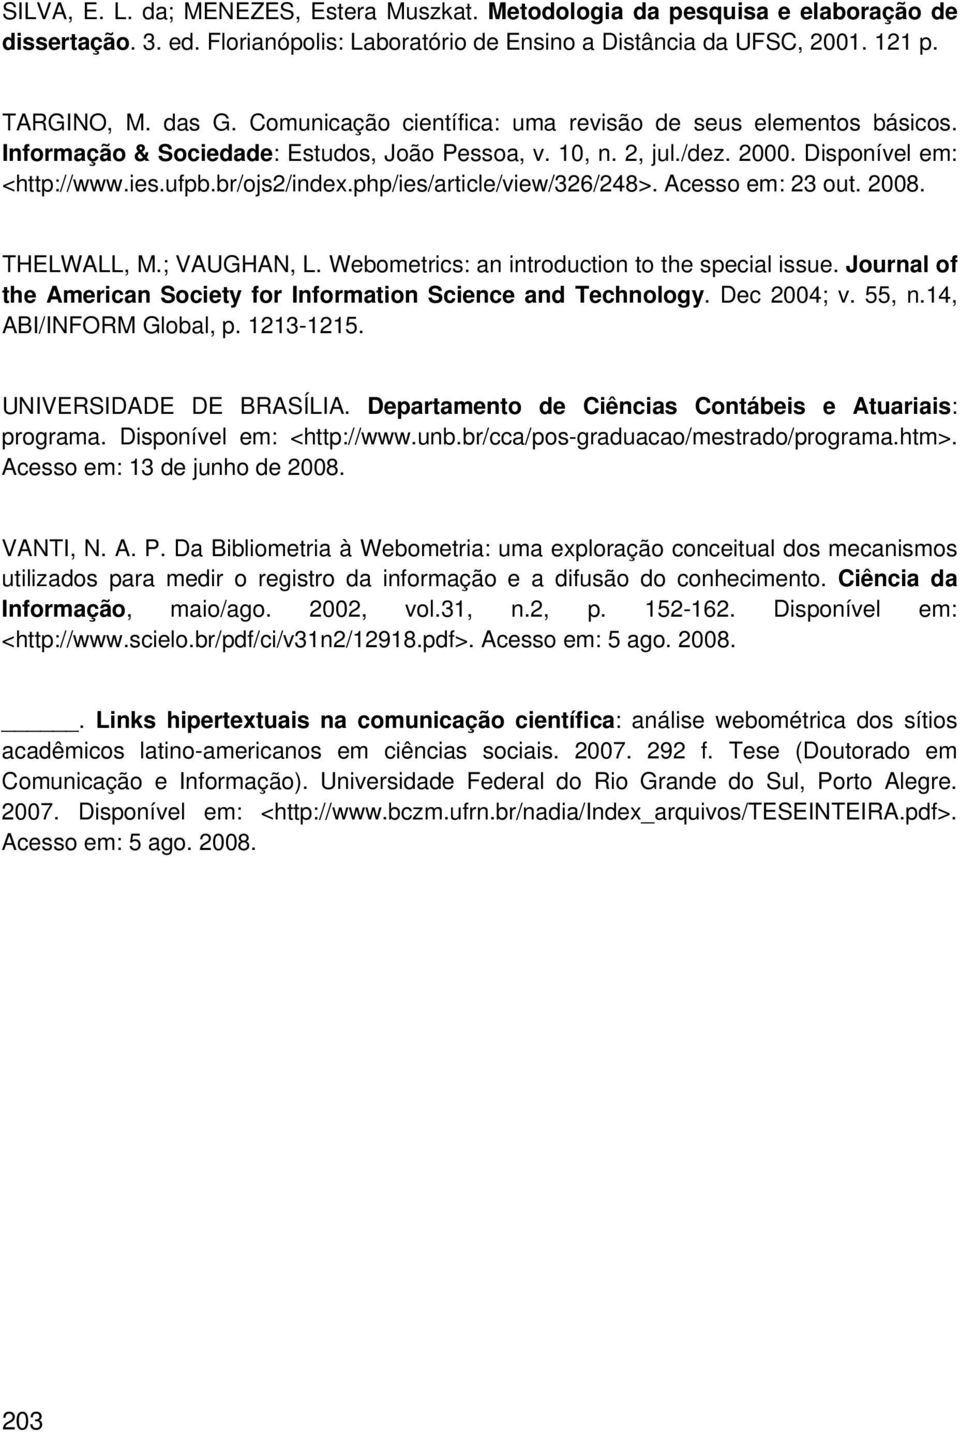 php/ies/article/view/326/248>. Acesso em: 23 out. 2008. THELWALL, M.; VAUGHAN, L. Webometrics: an introduction to the special issue.